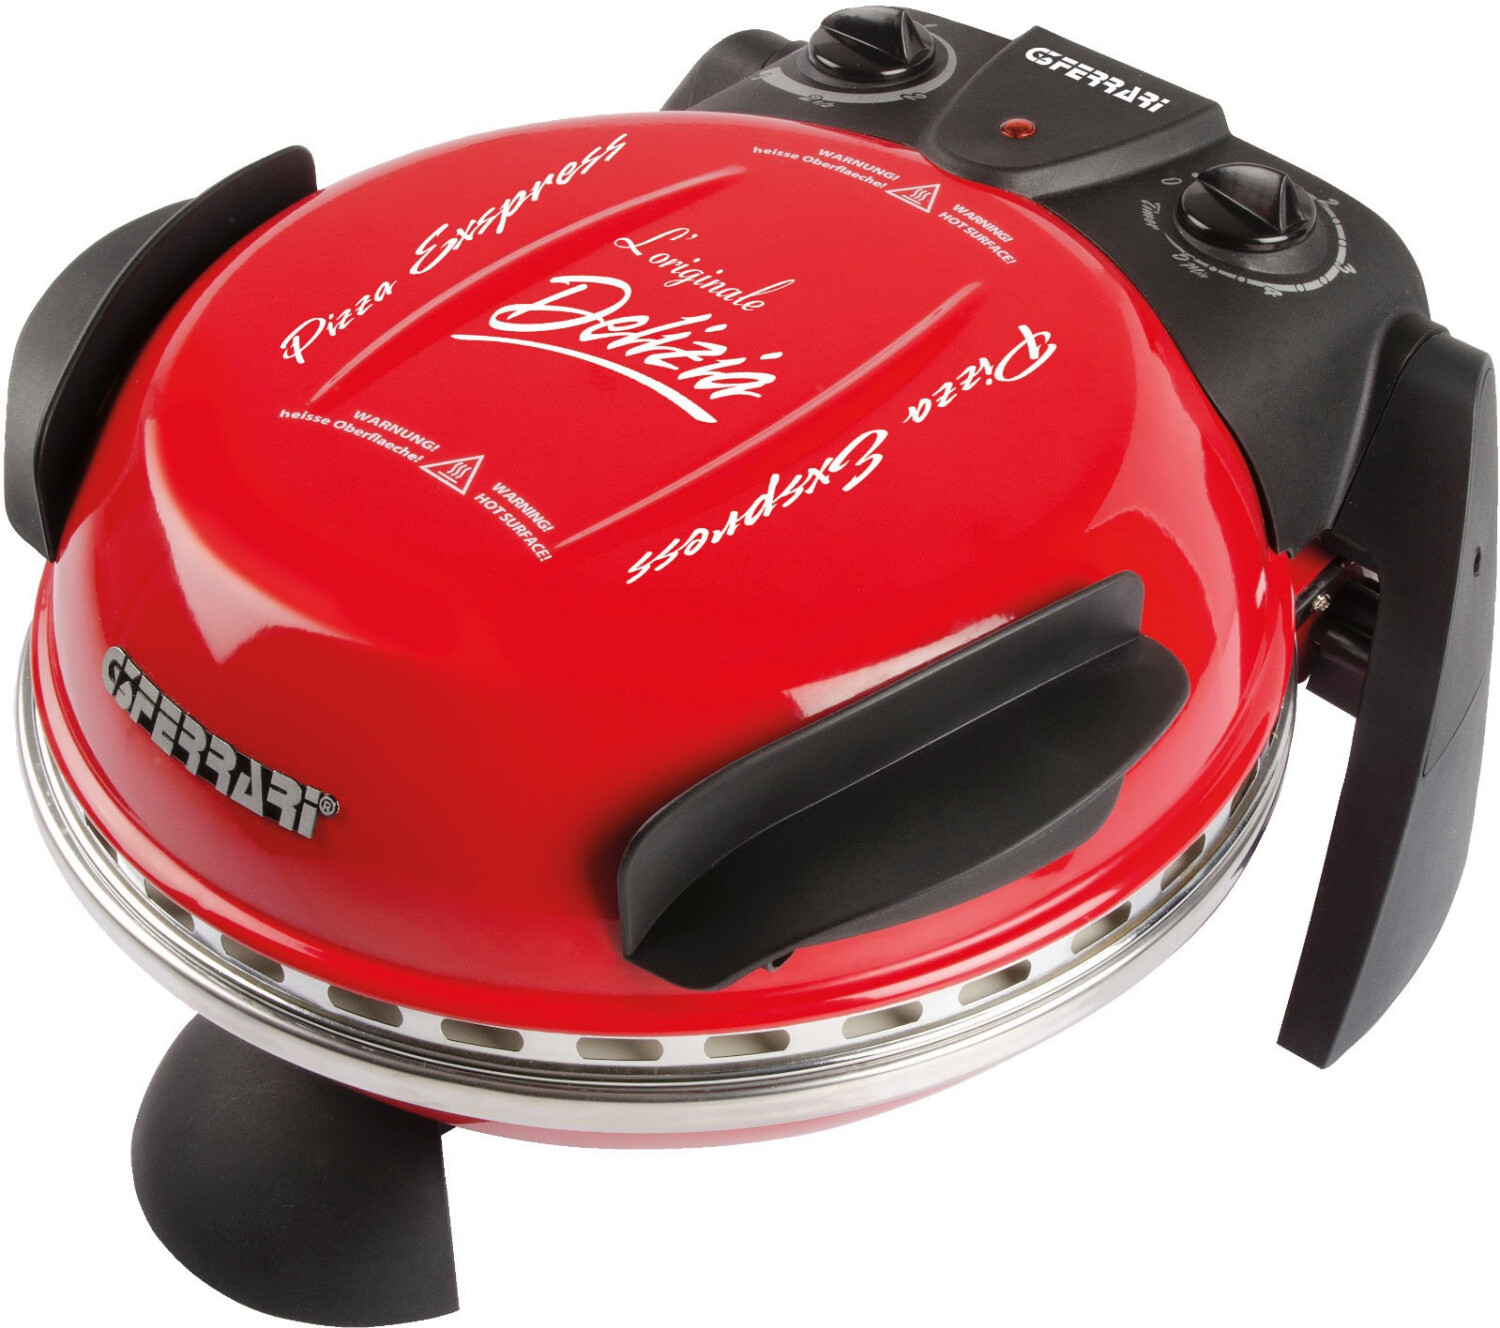 Buy G3 Ferrari Delizia Pizza Express from £91.99 (Today) – Best Deals on